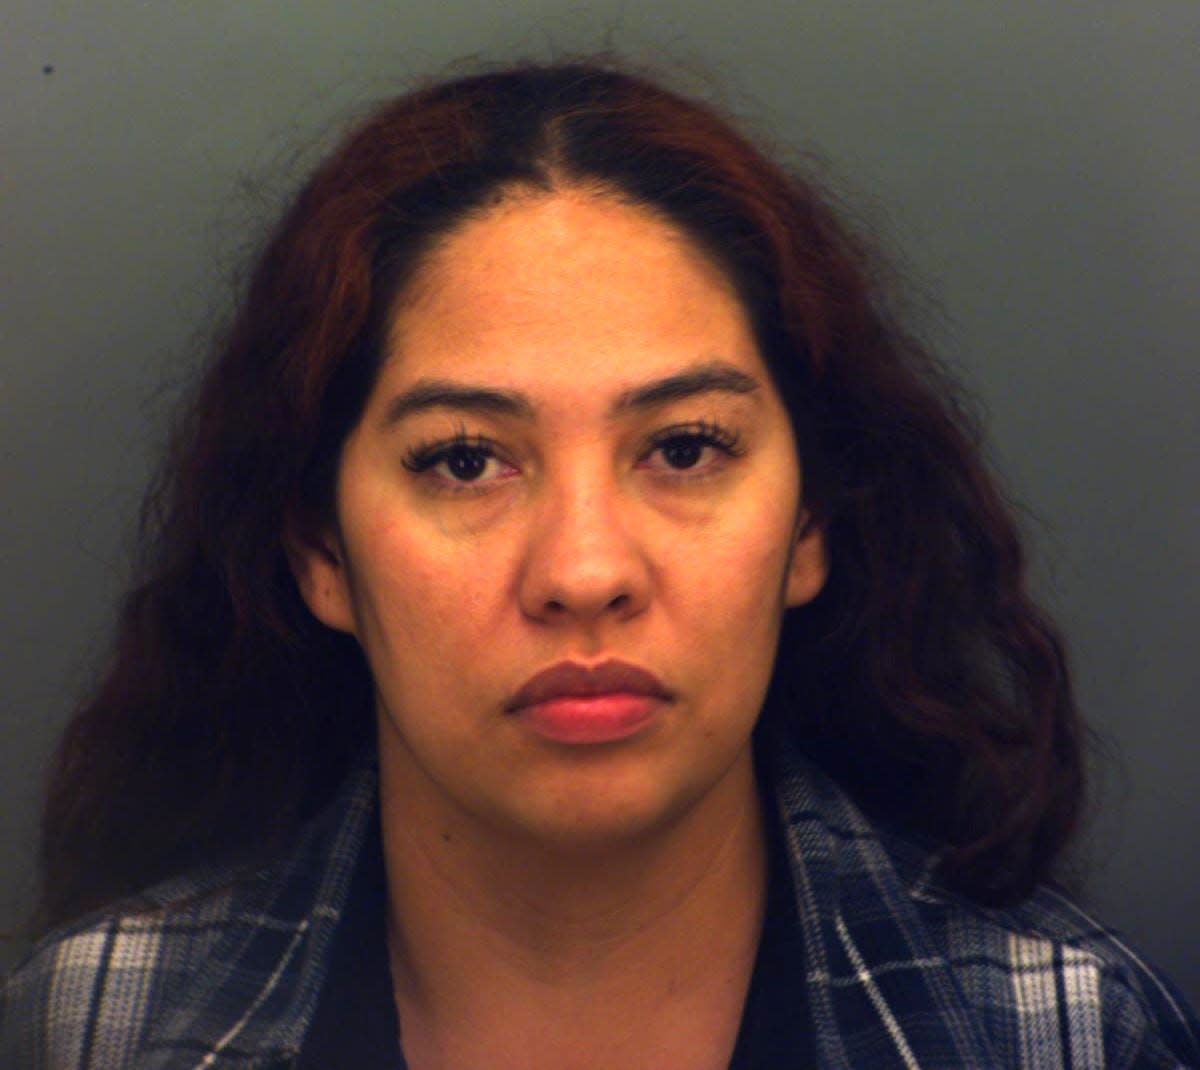 Lorena Anyla Enriquez Acosta was arrested on a drug possession charge on Oct. 20 during a Texas Department of Public Safety investigation into a drug cartel-linked human smuggling ring in El Paso.